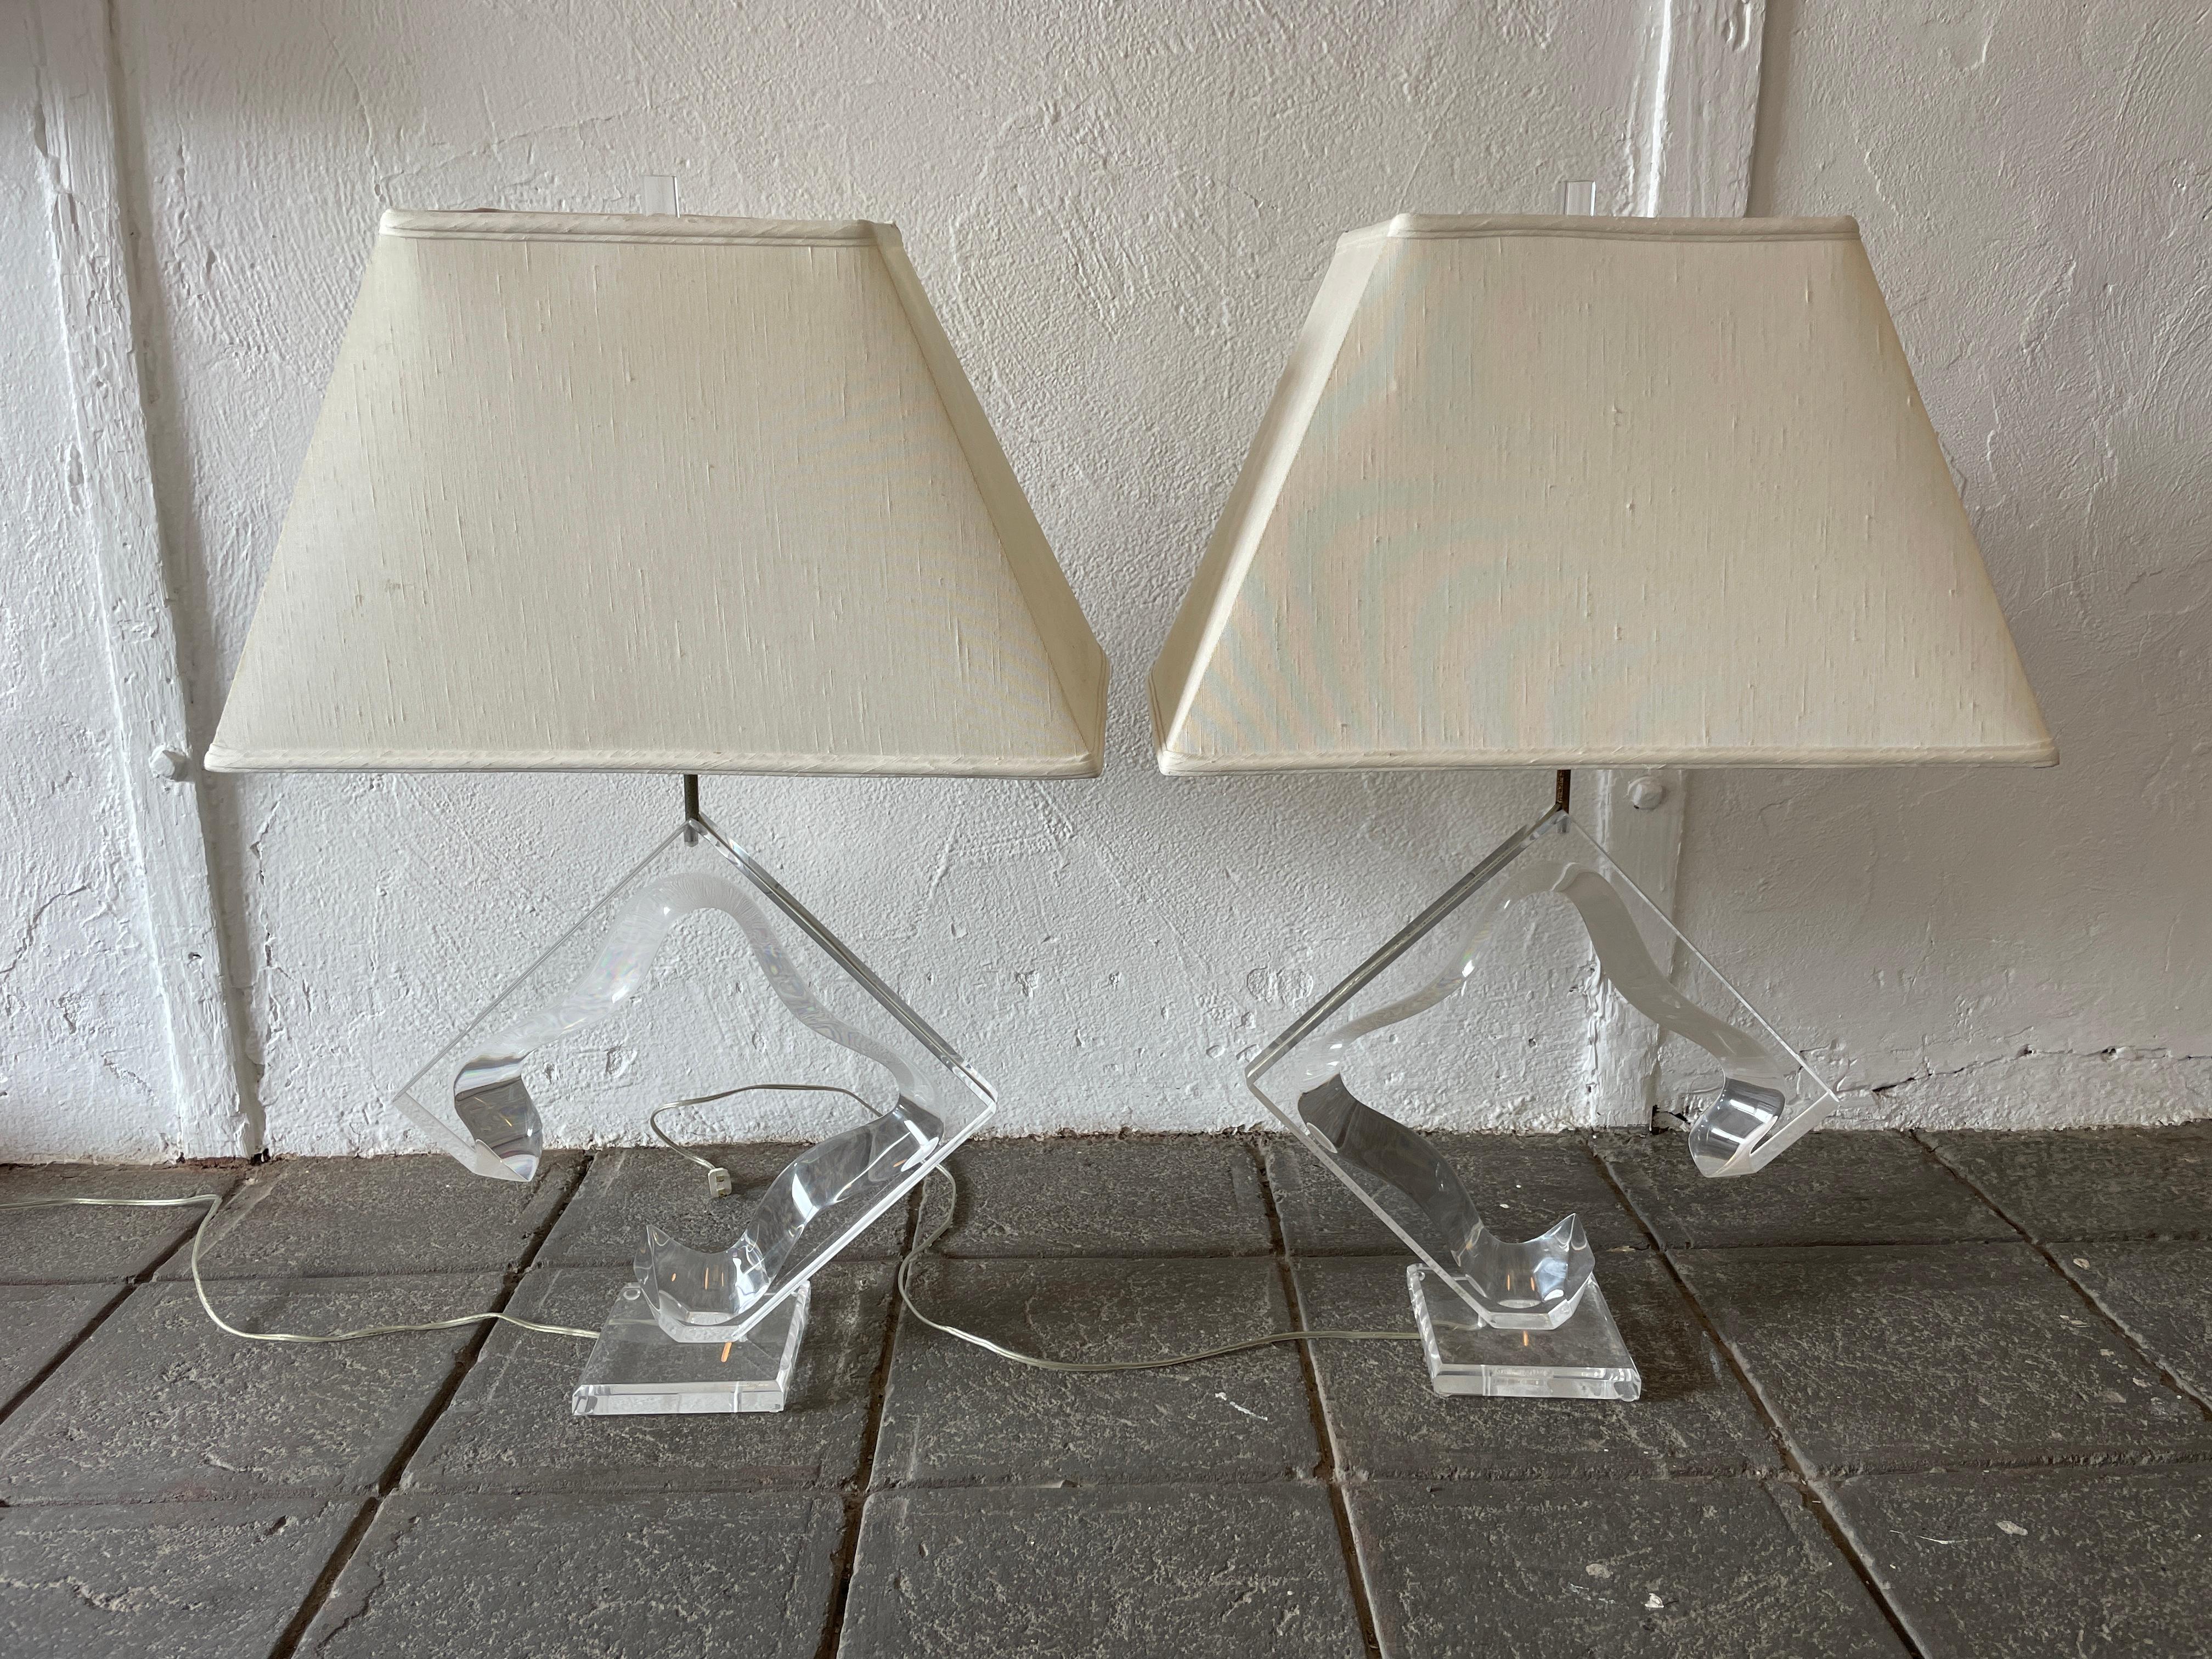 Mid-Century Modern Pair of custom Lucite table lamps with rectangular shades. 120v American Plug - Lamps function 100% takes normal Edison Light bulbs. Located in Brooklyn NYC.